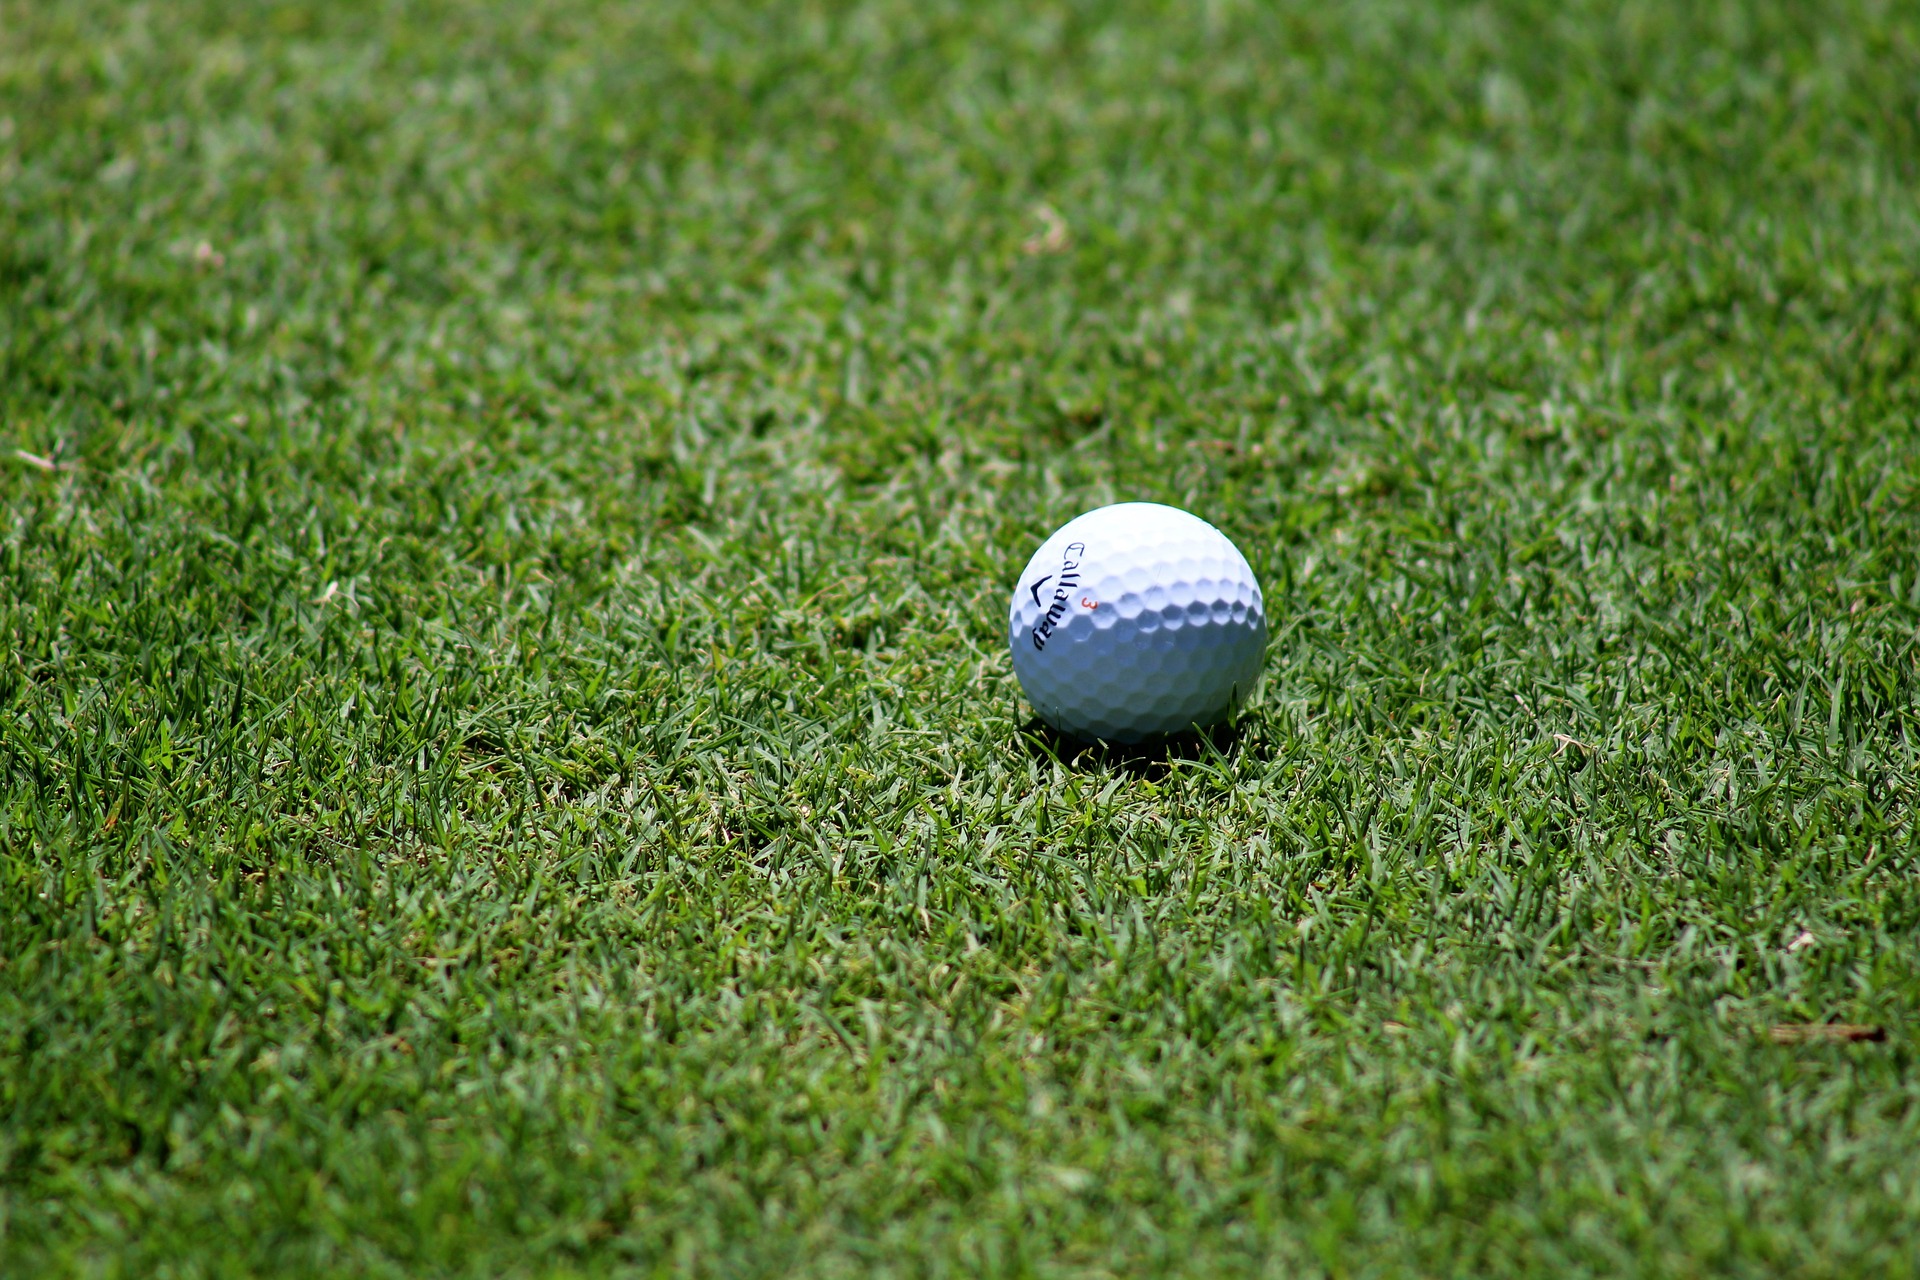 A golf ball on the putting green